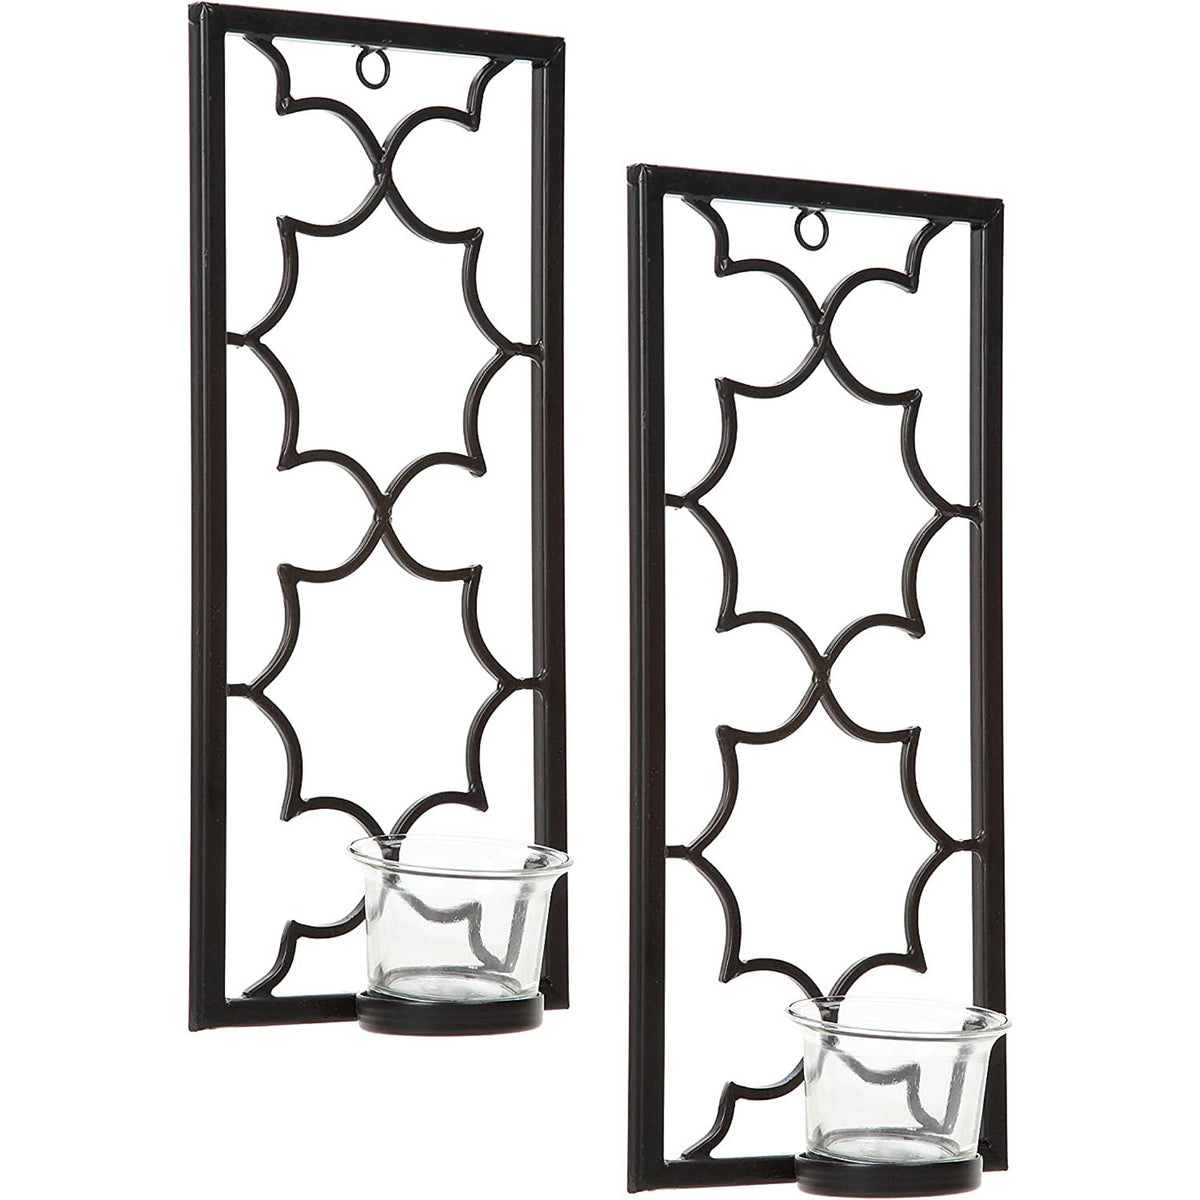 HOSLEY® Iron Wall Sconces,  Black Color, Set of 2,  11 inches High